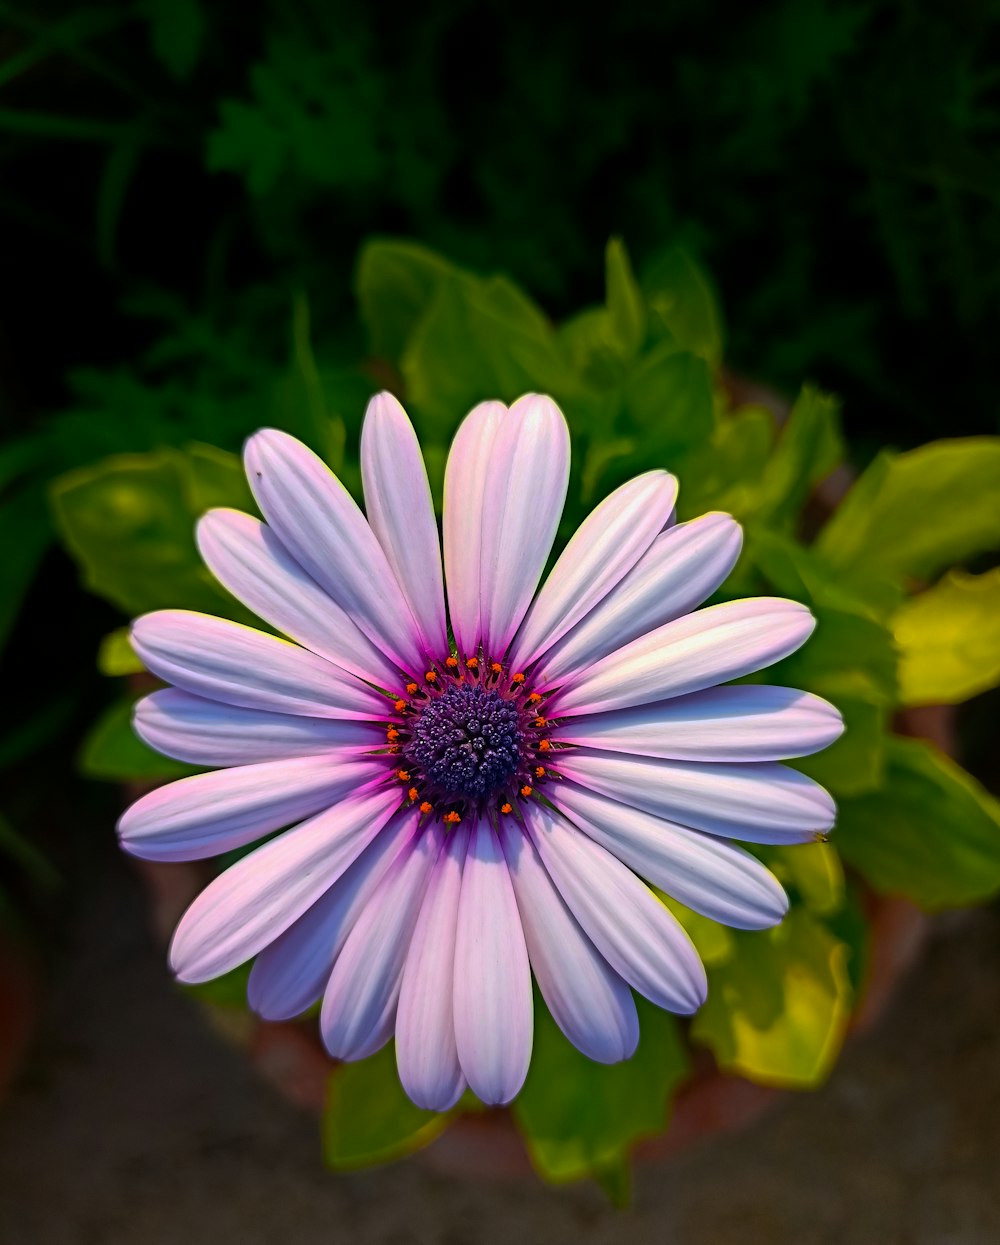 a purple and white flower with green leaves in the background